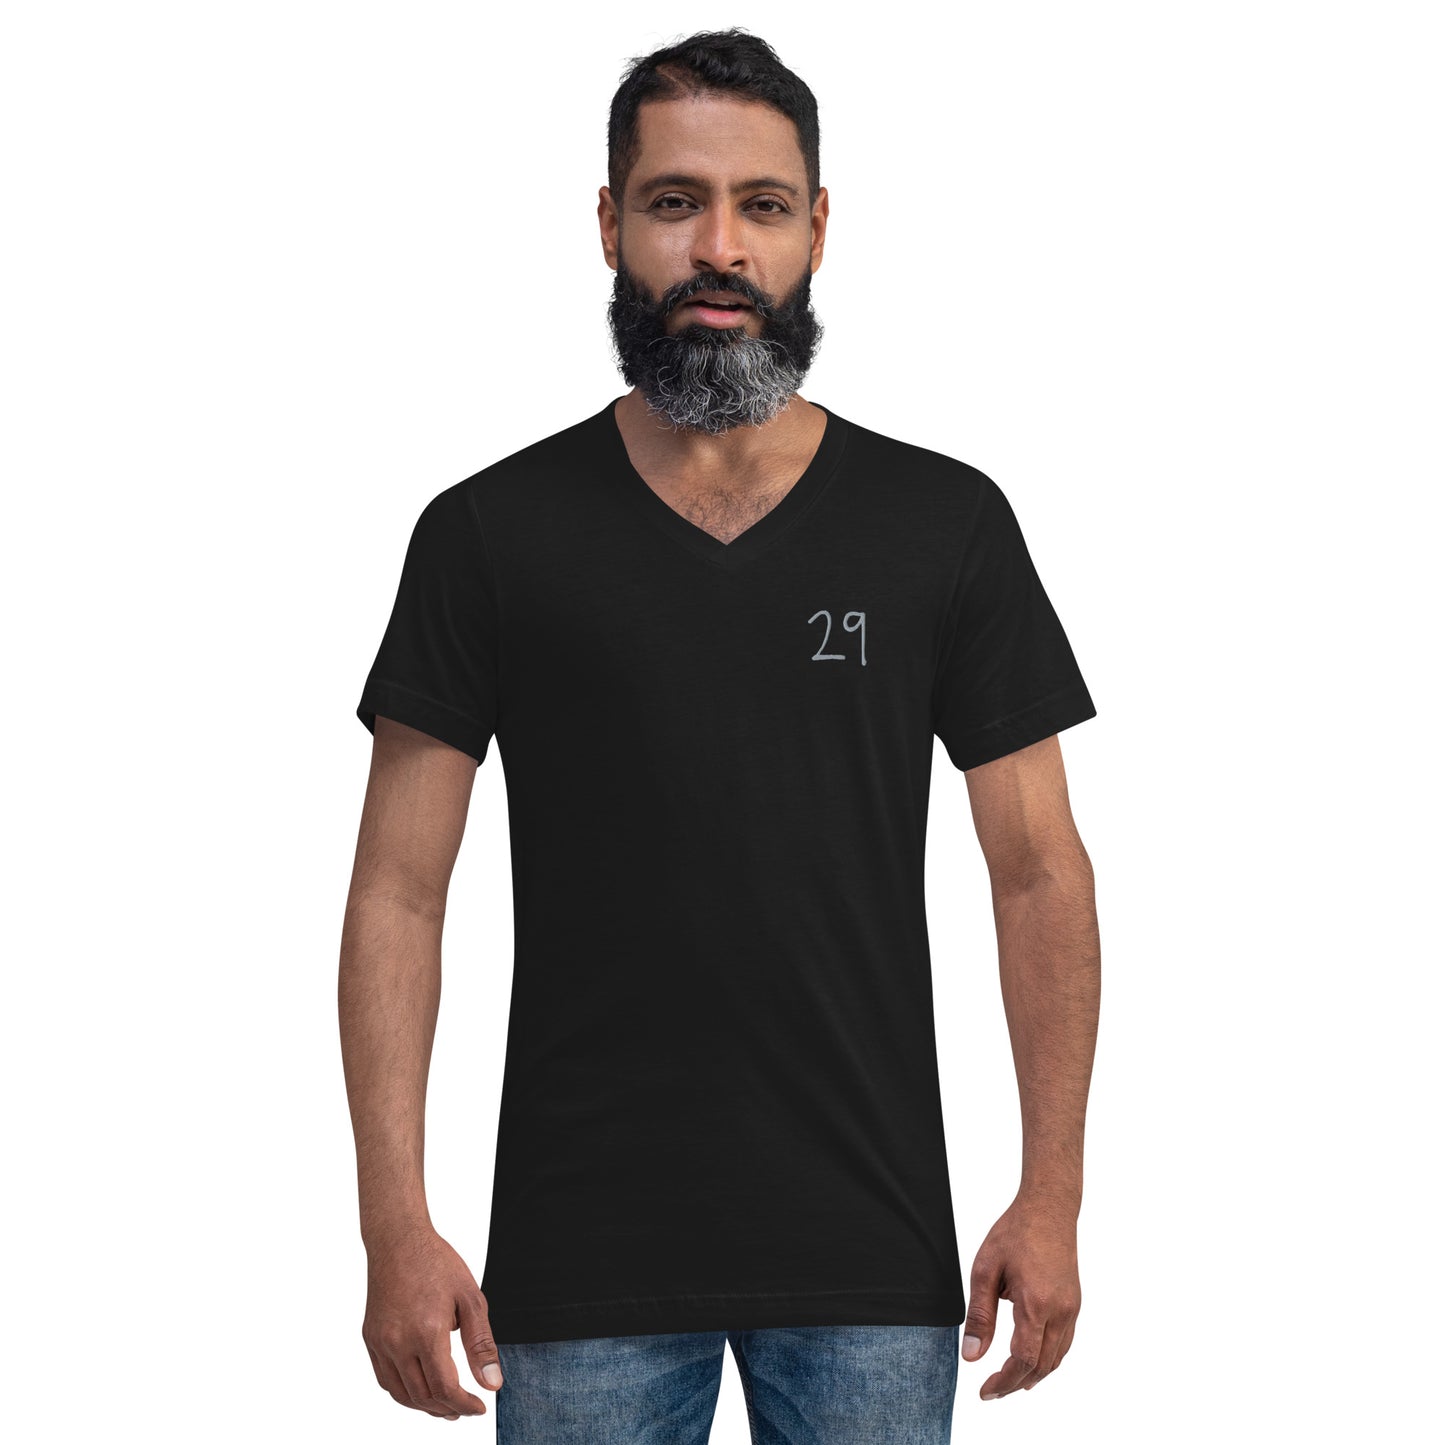 29 Embroidered Logo T-Shirt